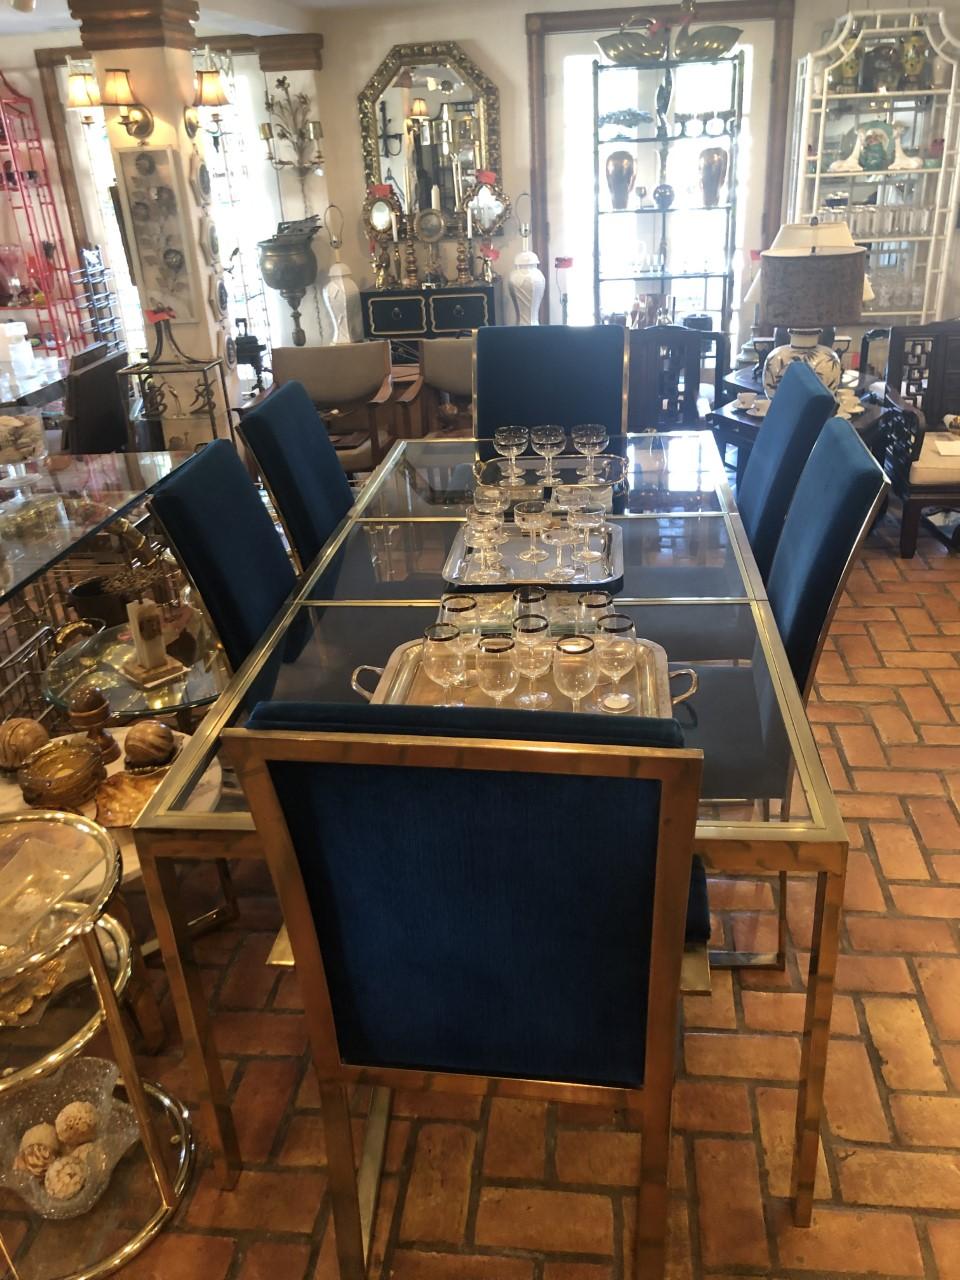 Milo Baughman style adjustable brass dining table set.
The glass top separates into three glass panels that lift out and the table then can shrink to be smaller on its own track. Set of 6 brass dining chairs in blue velveteen. Two armchairs that